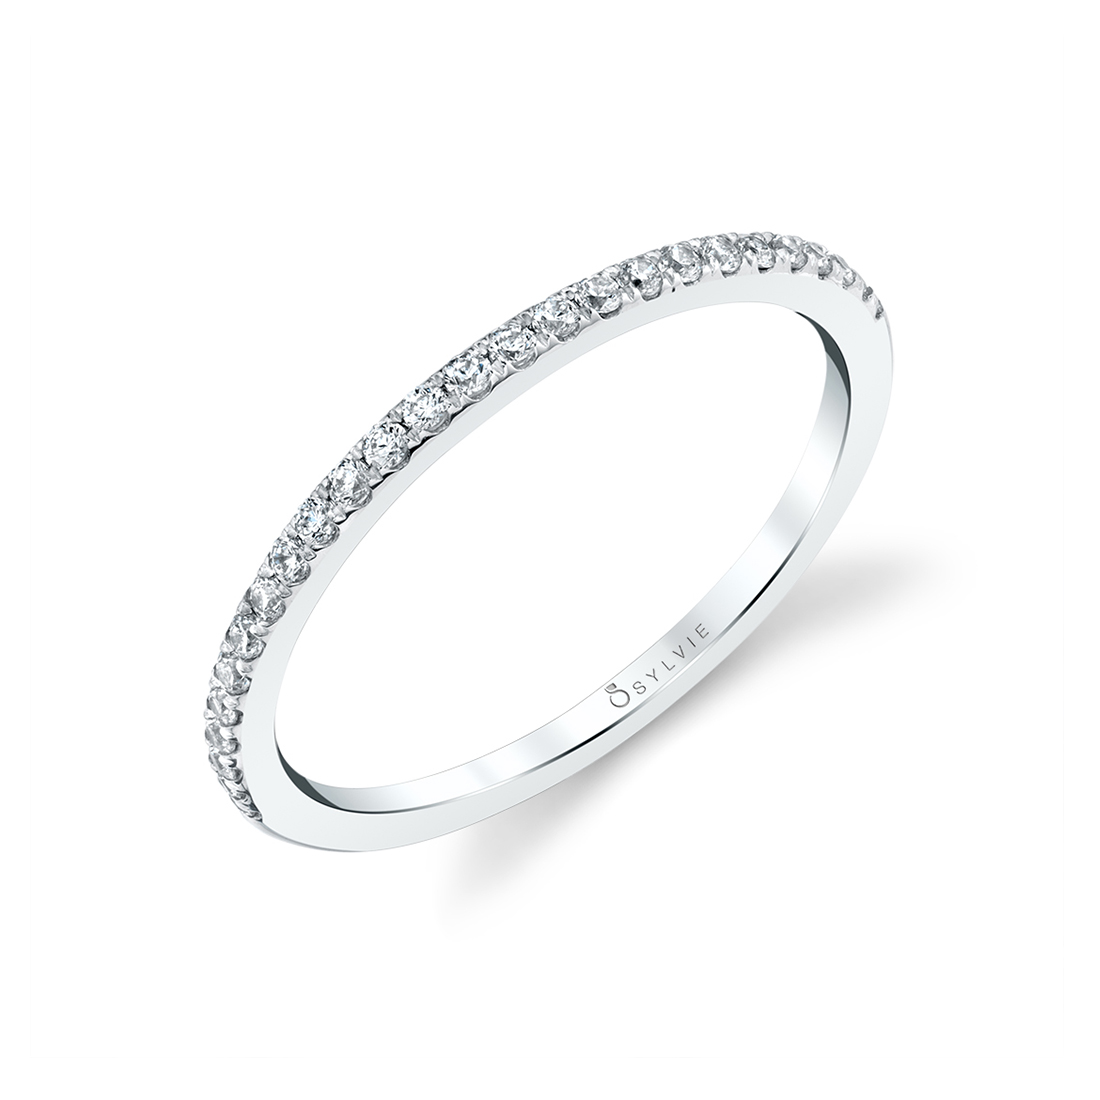 Thin Wedding Band in White Gold